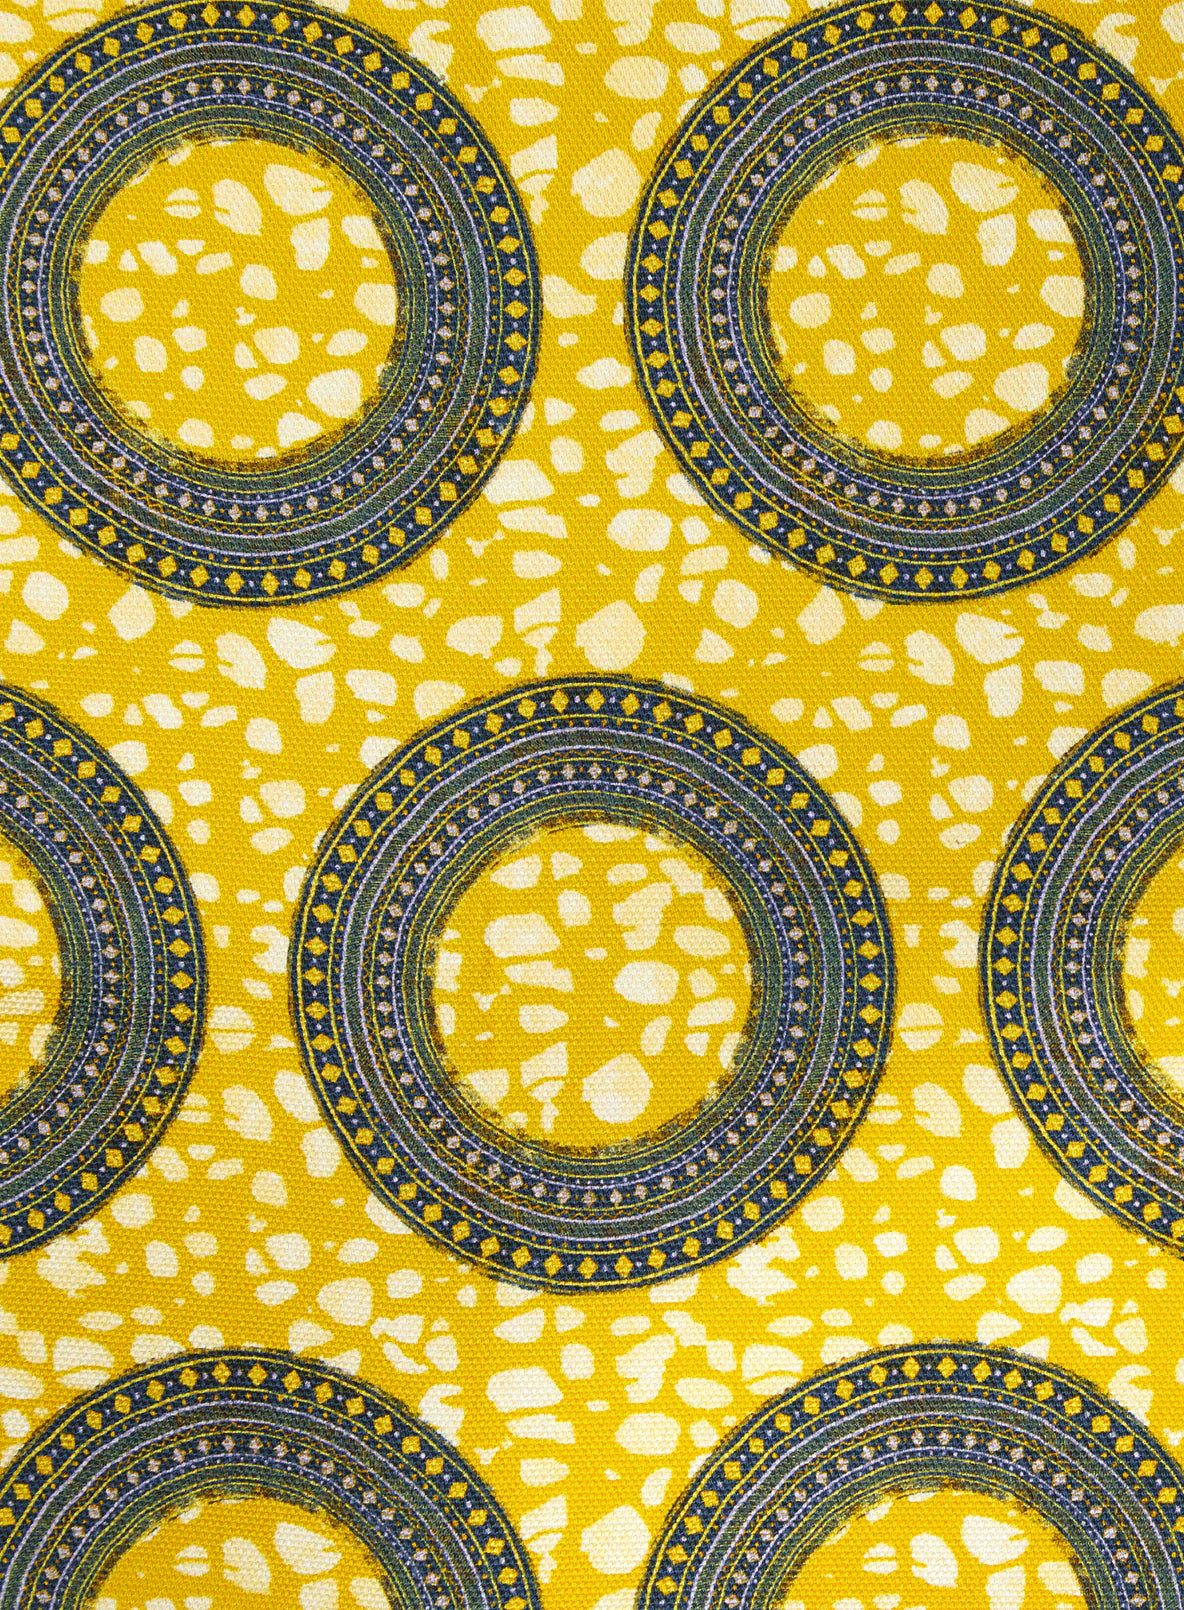 Detail of fabric in an intricate circular print in shades of yellow, blue and white.